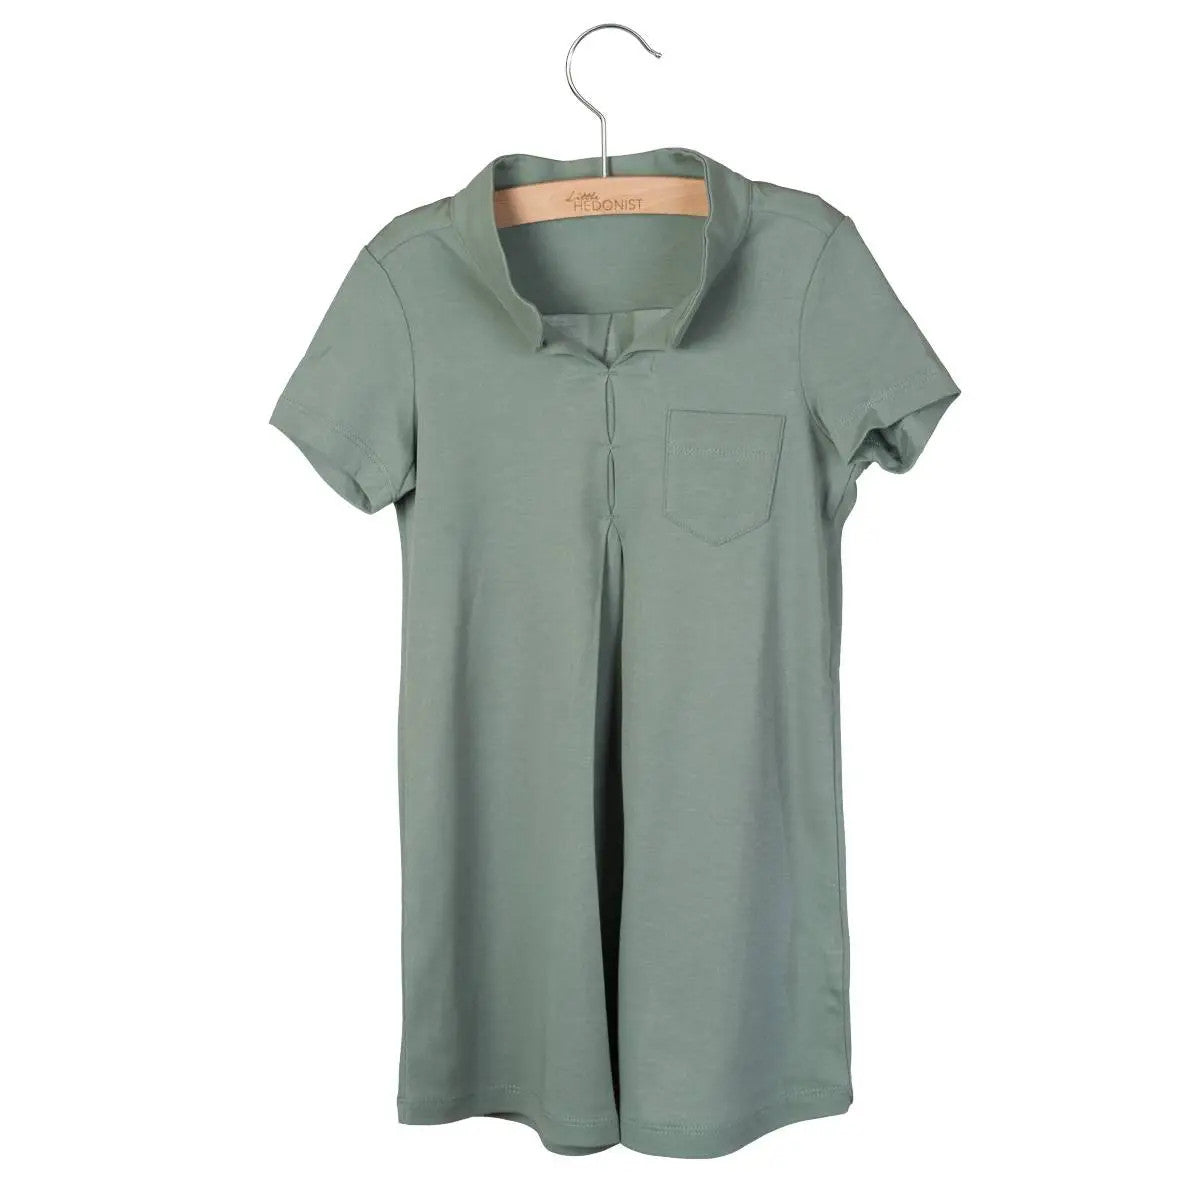 Little Hedonist organic cotton dress, short sleeve, knee length dress in Chinois Green